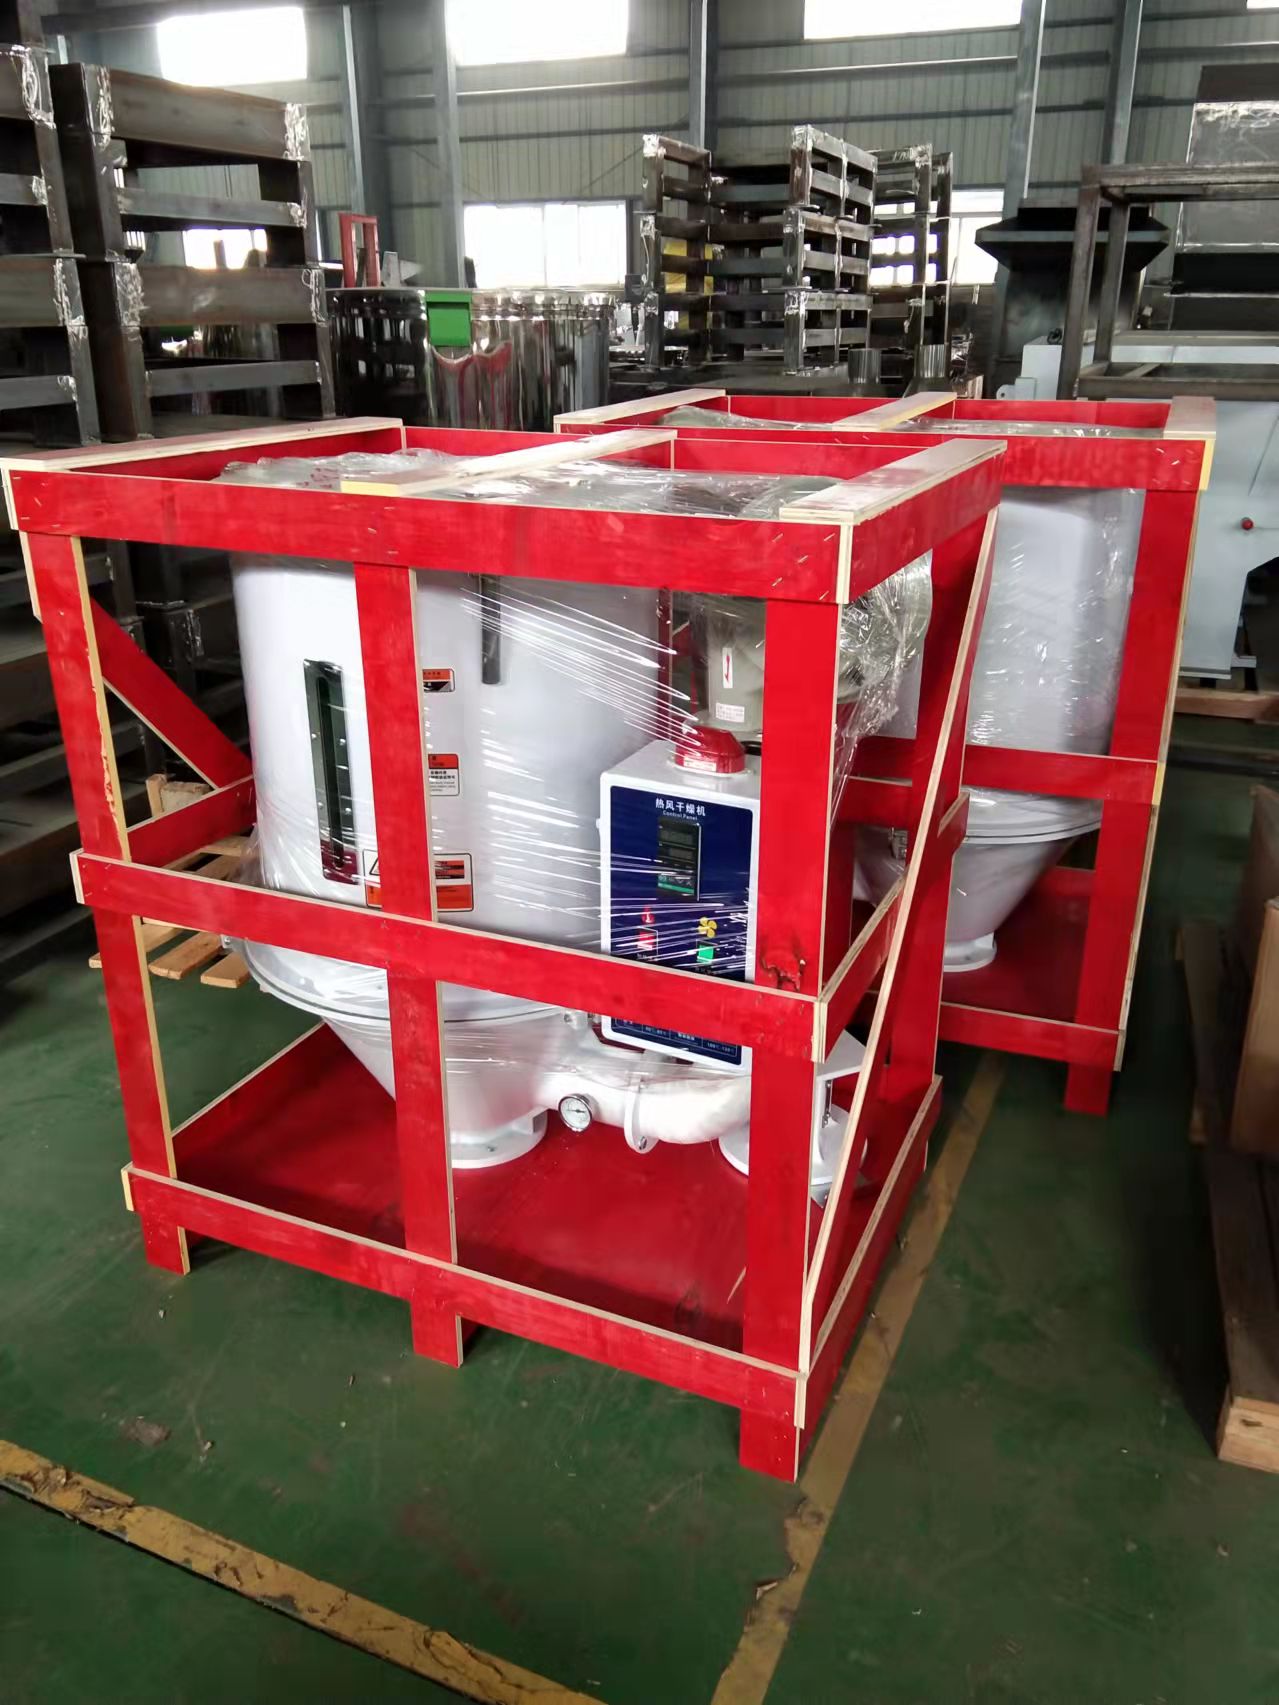 Plastic Hopper Dryer Drying Machines Hot Air Drying Plastic Industrial Hot Product Injection Moding Machine Provided 122 25